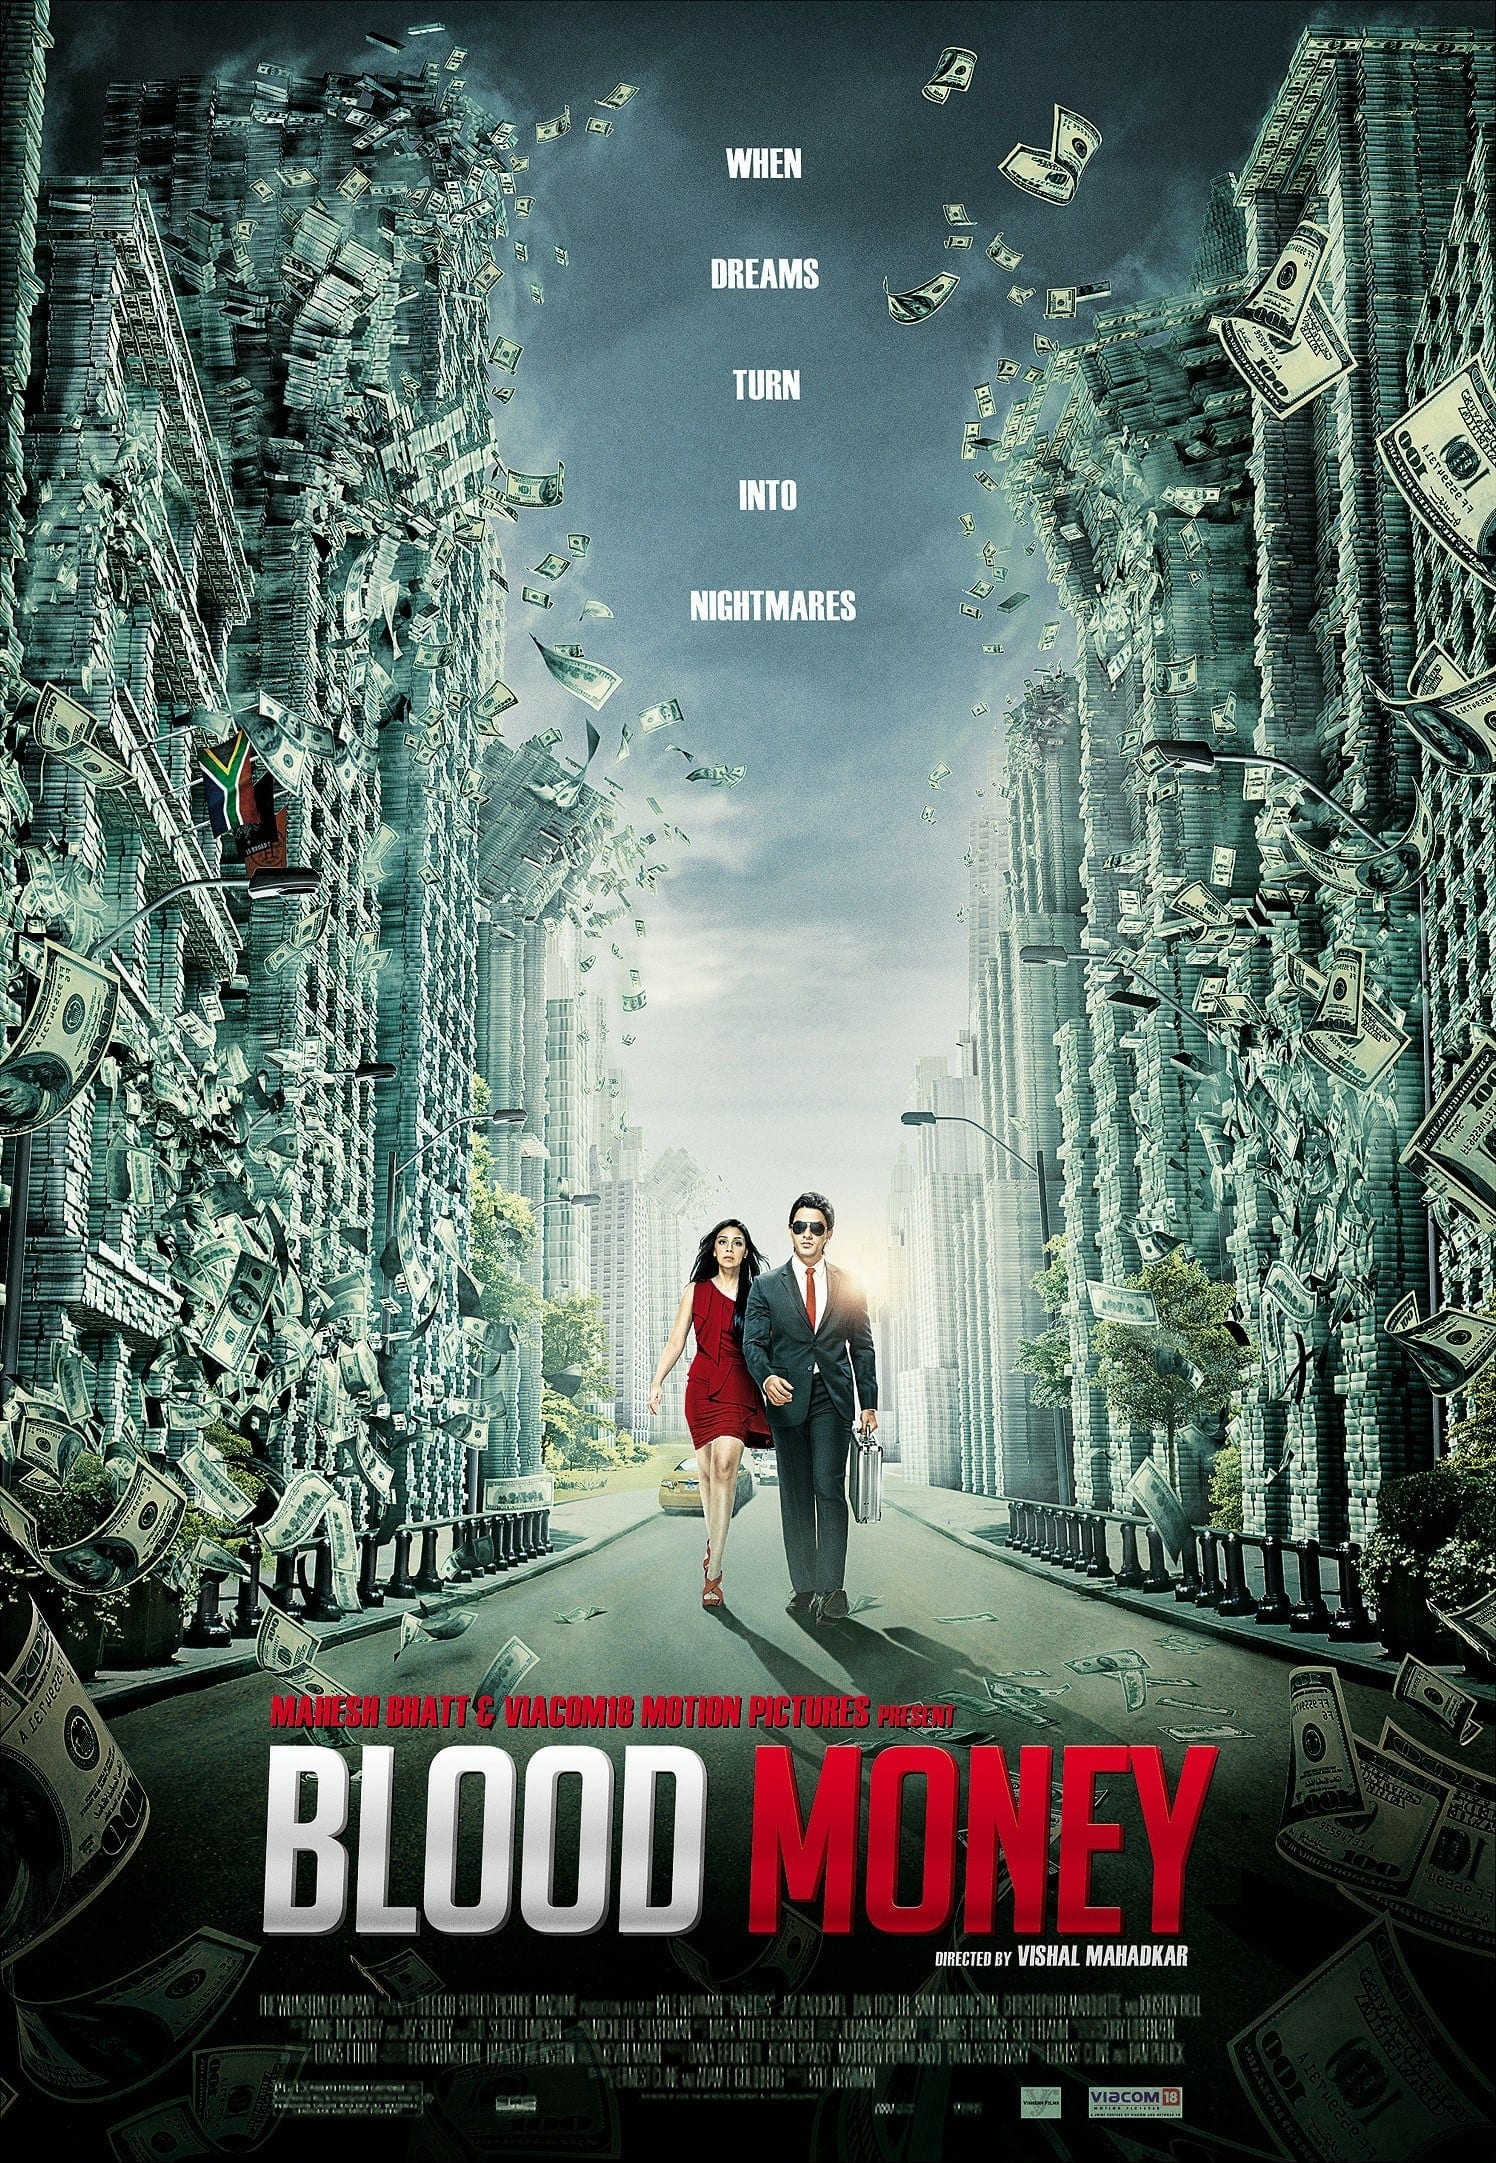 Poster for the movie "Blood Money"